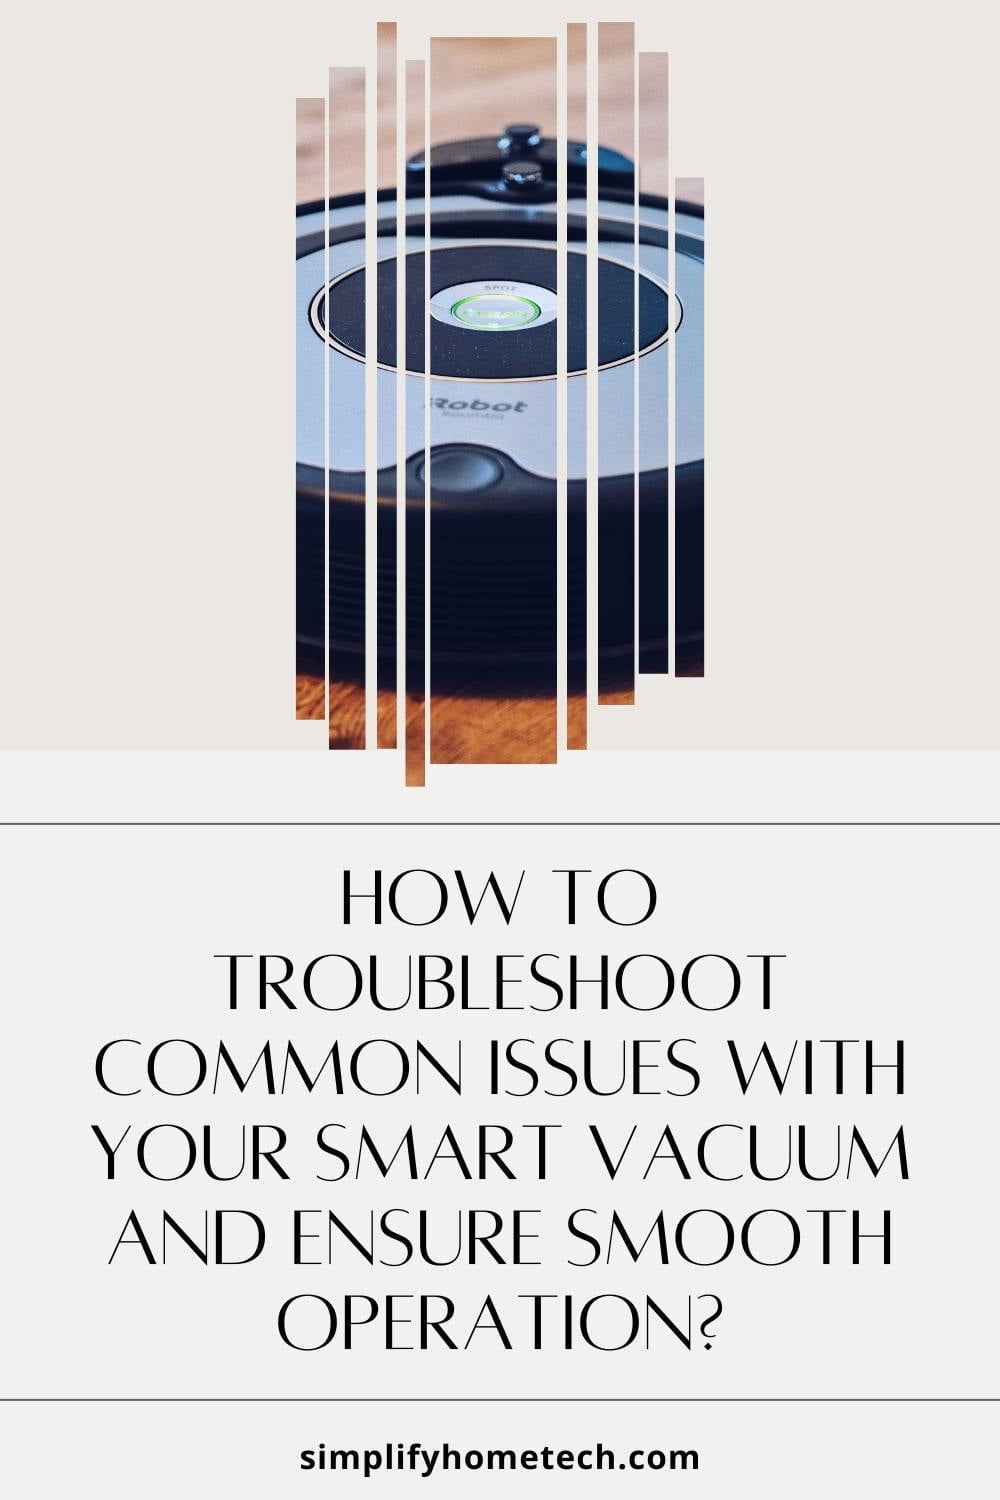 How to Troubleshoot Common Issues with Your Smart Vacuum